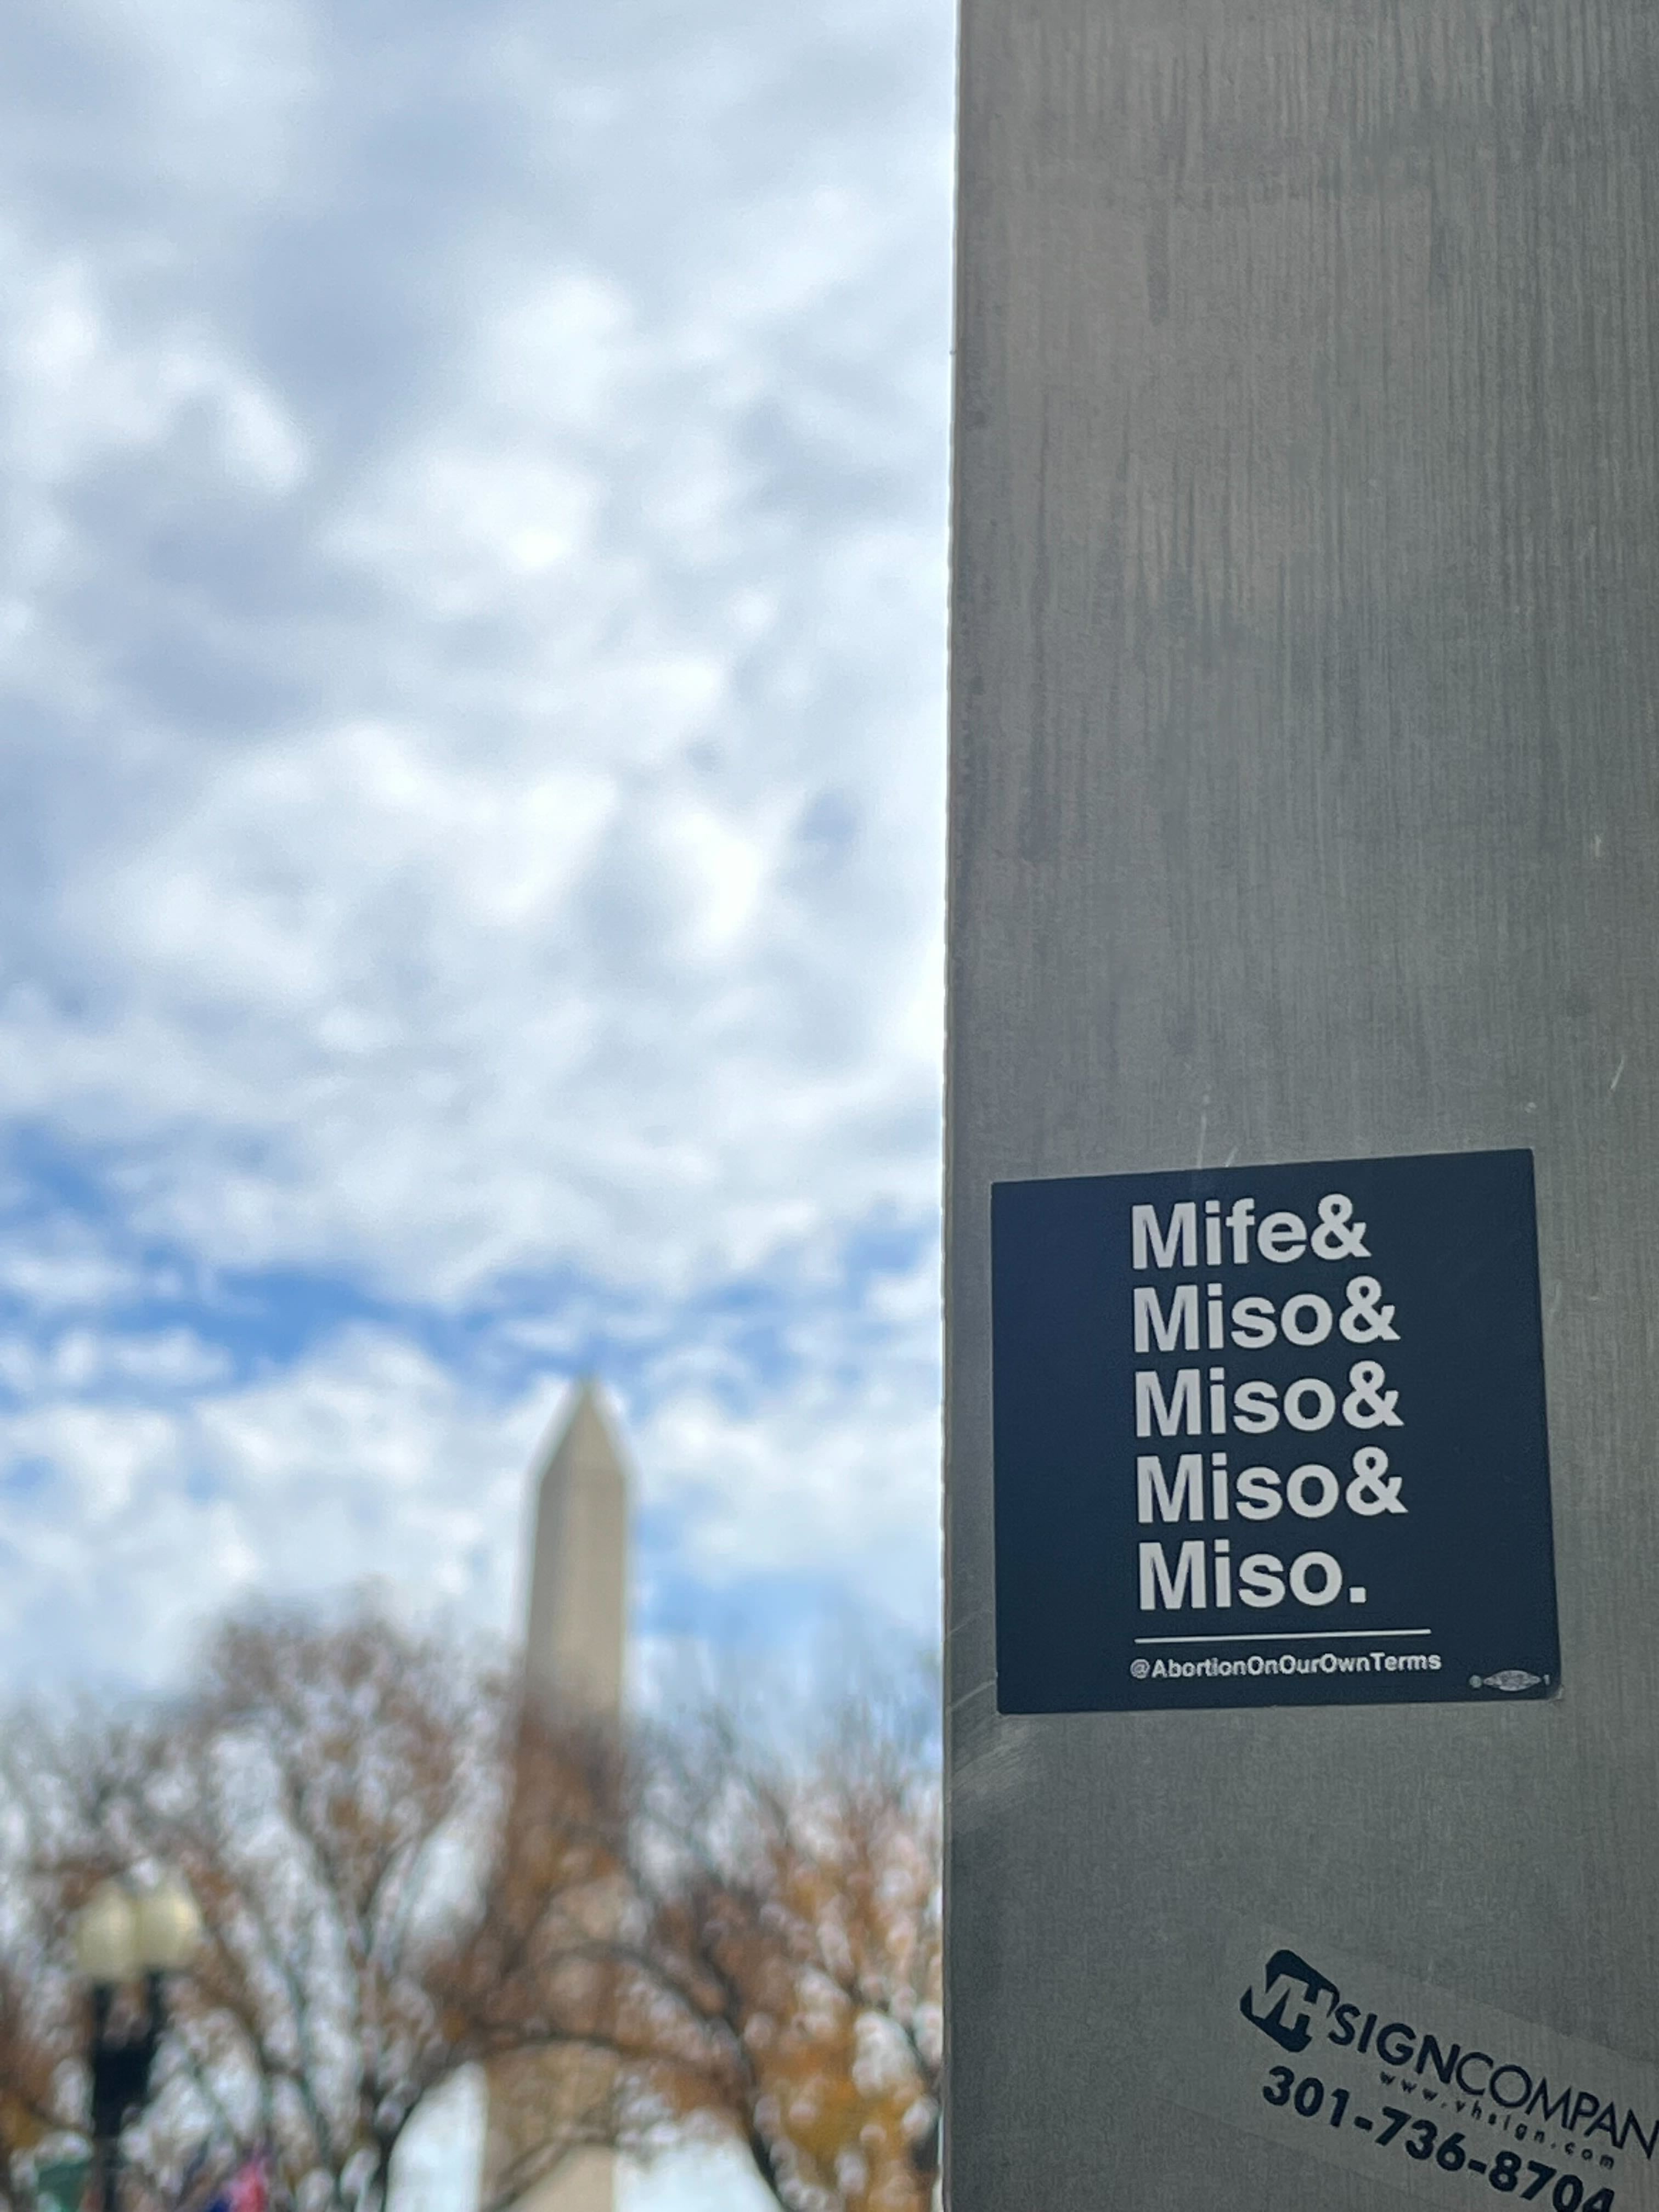 A photo of a small flyer, black with white lettering that reads: “Mife & Miso & Miso & Miso & Miso. #AbortionOnOurOwnTerms